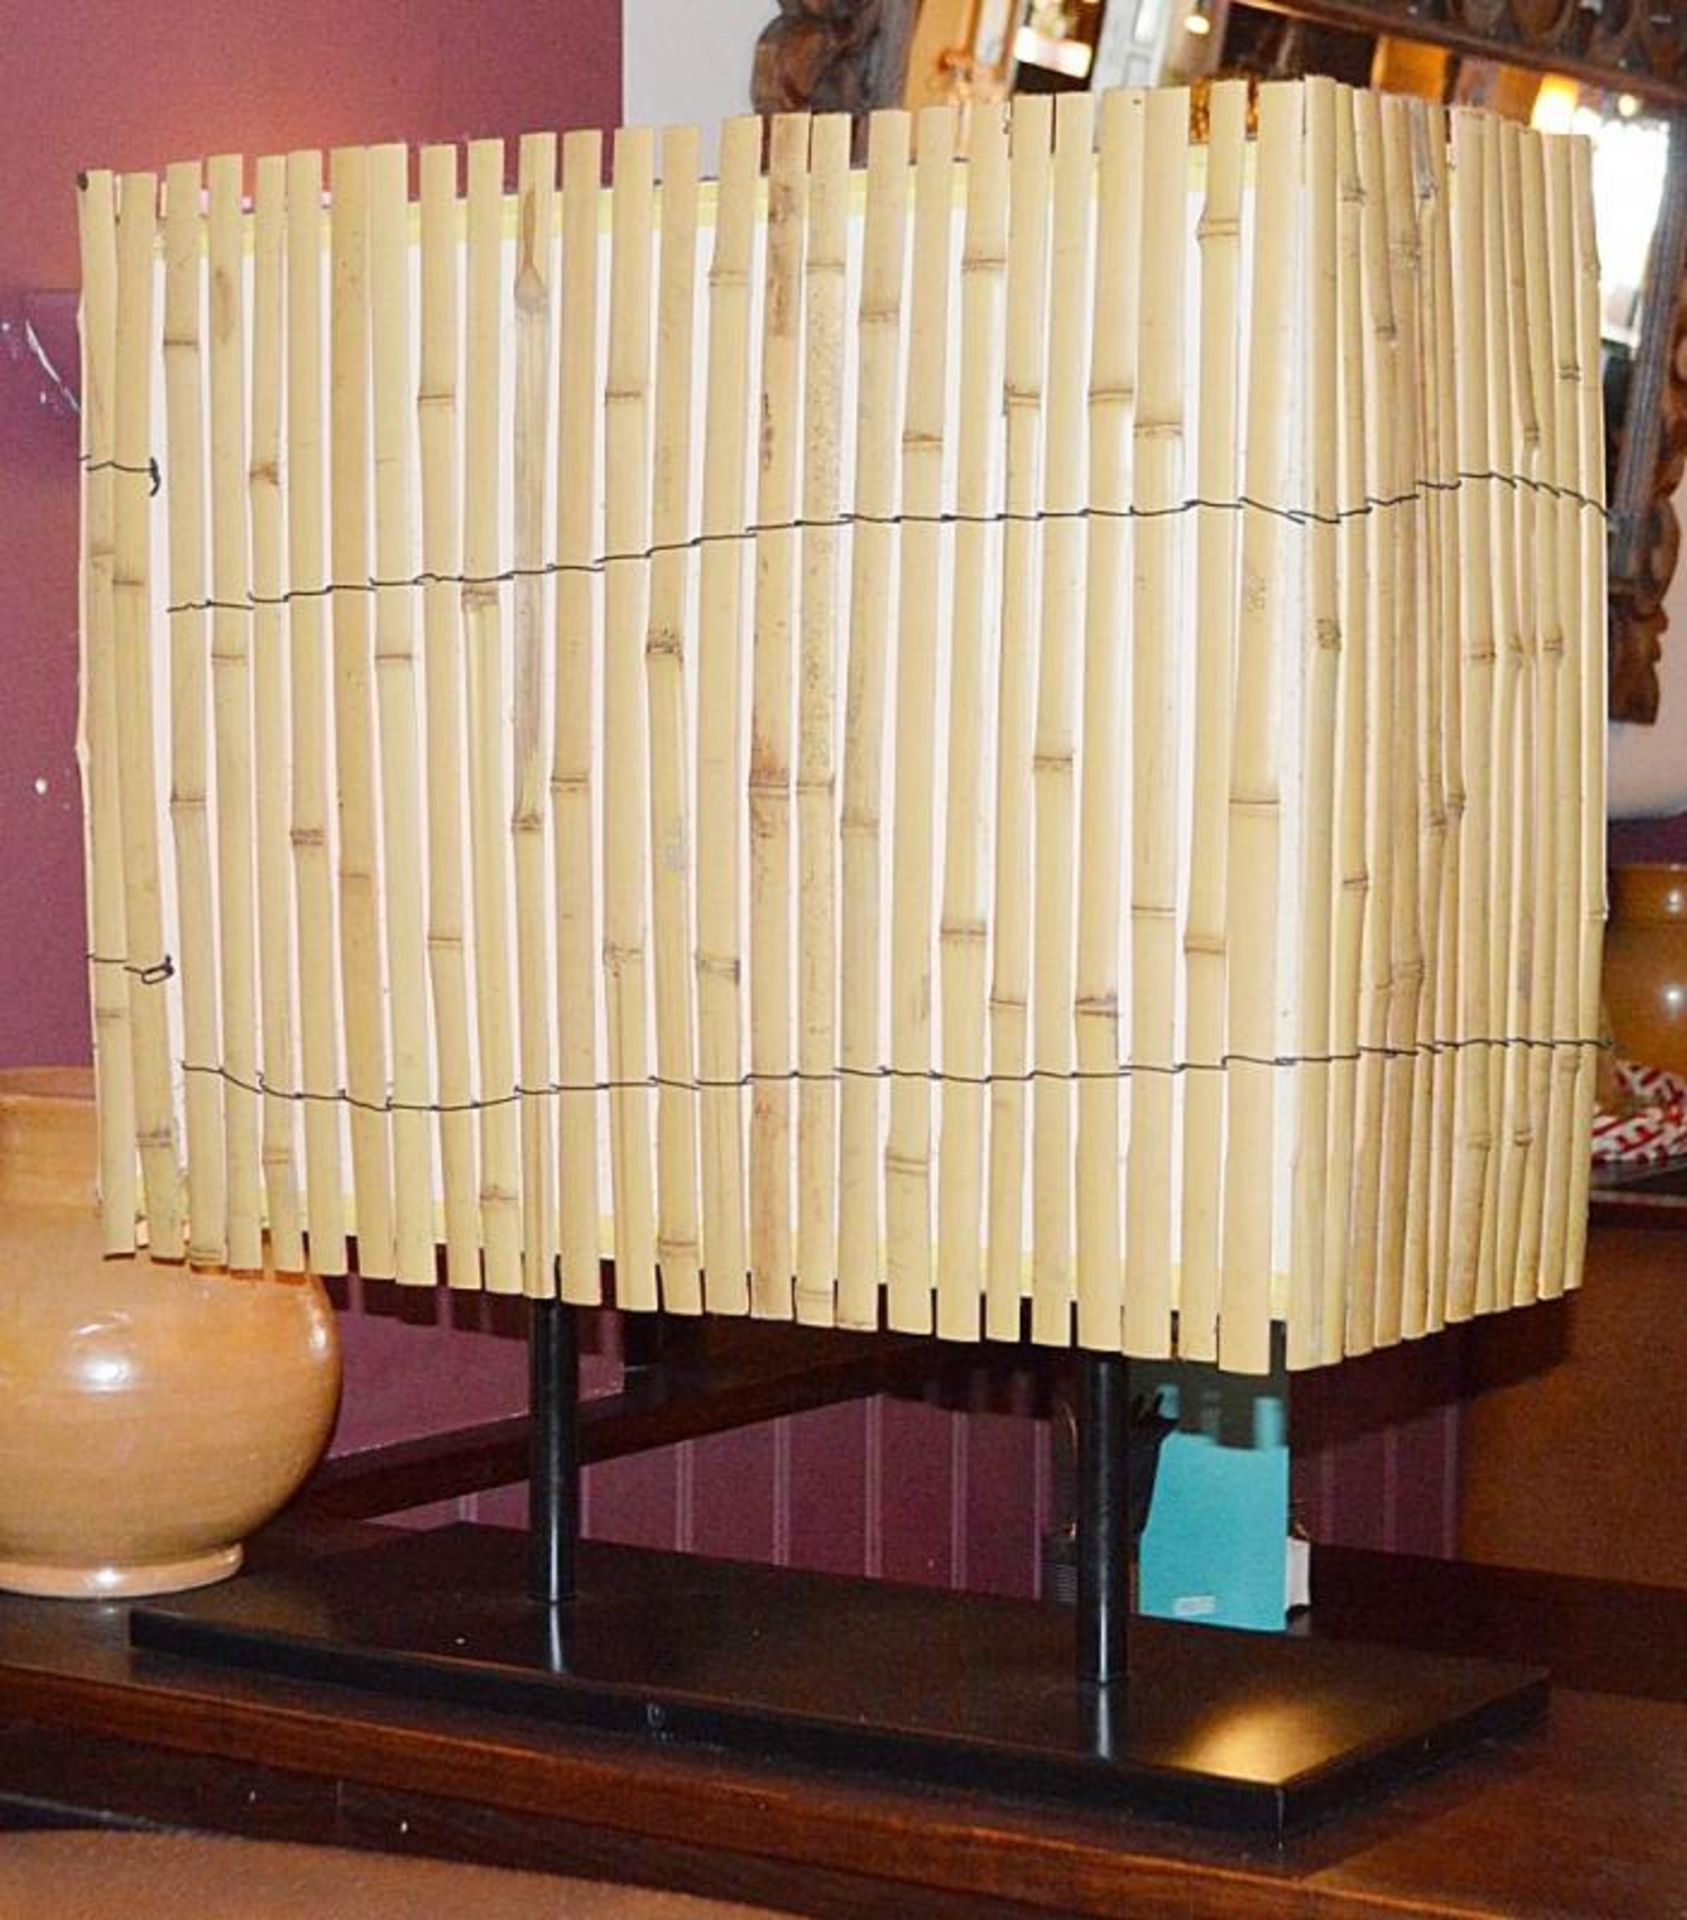 1 x Mexican-style Cane Table Lamp - Dimensions: H76 x W70cm - CL367 - Ref CQ-FB - Location: Manchest - Image 2 of 2